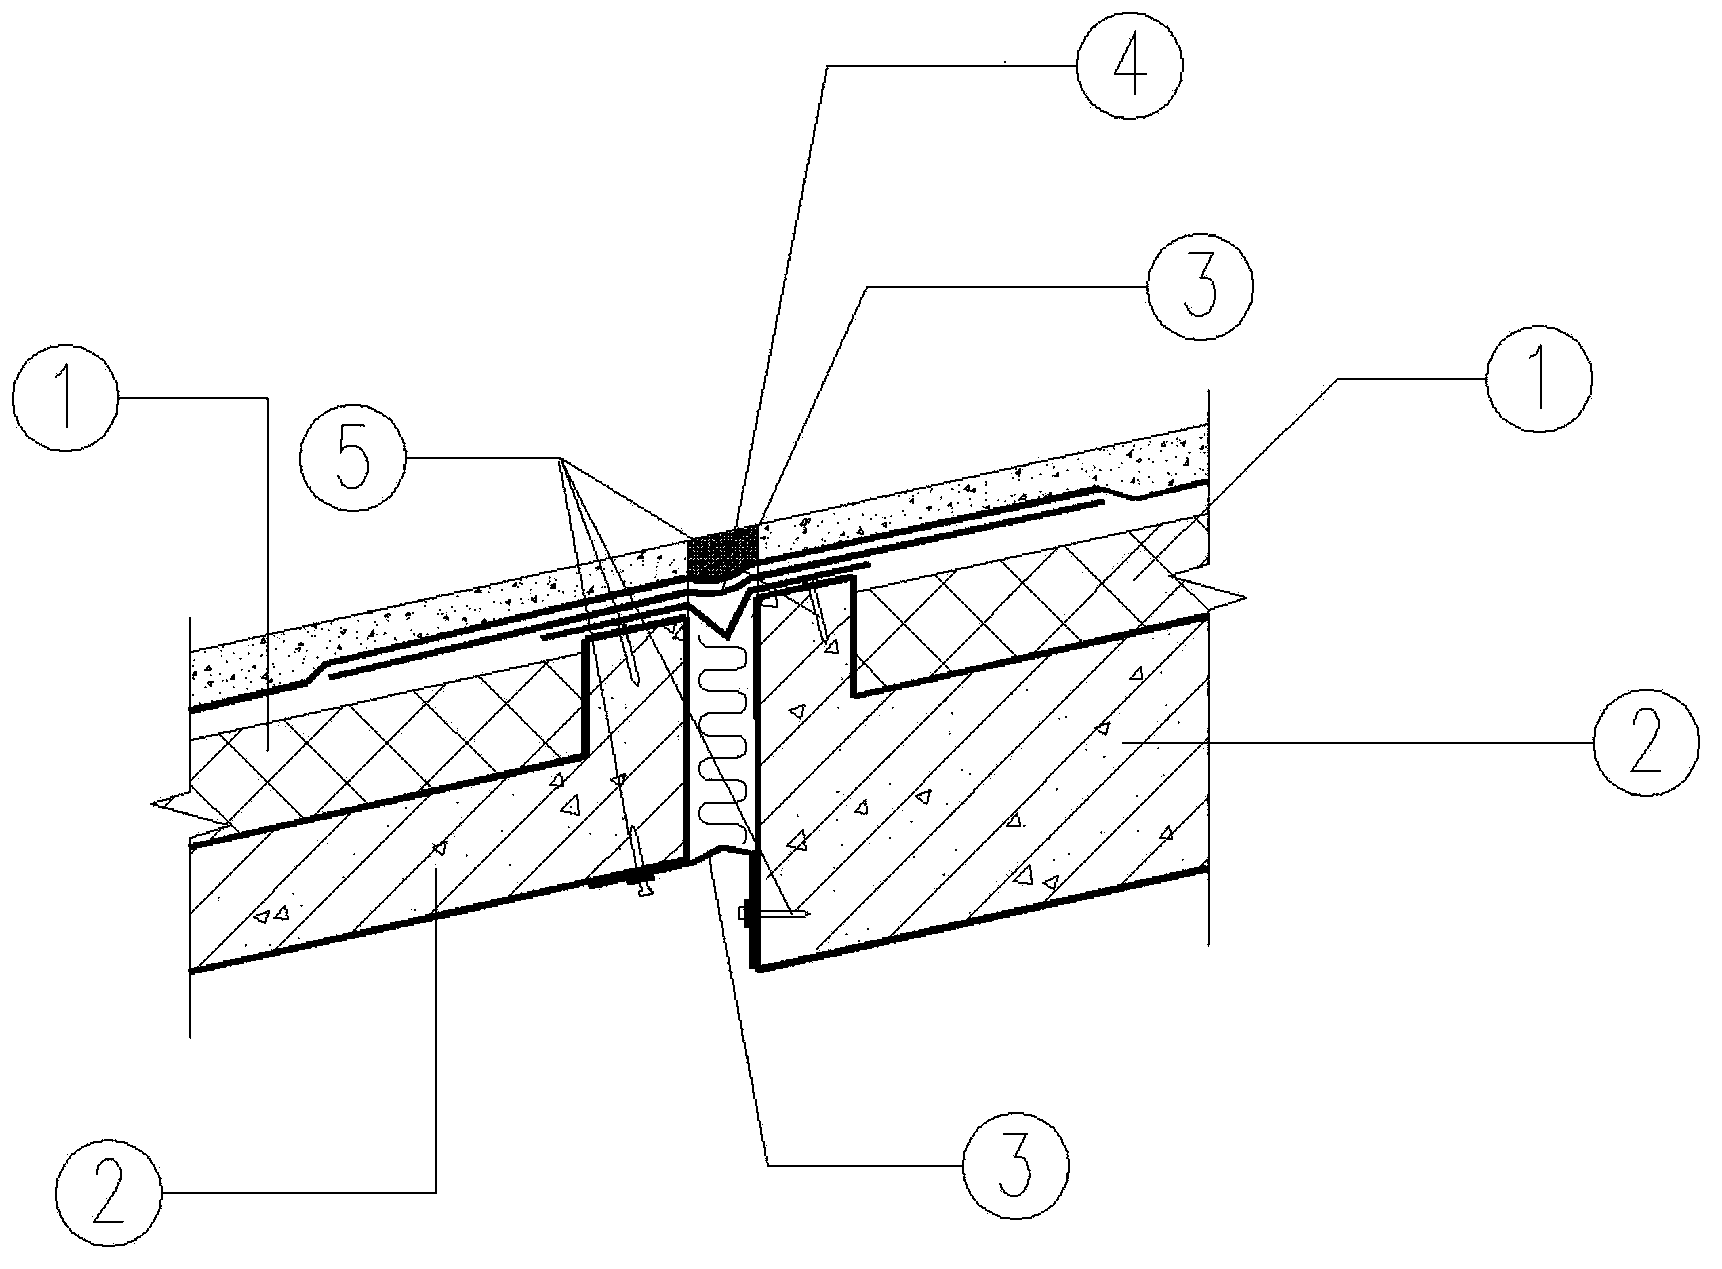 Deformable connection structure of concrete landing stage building surfaces